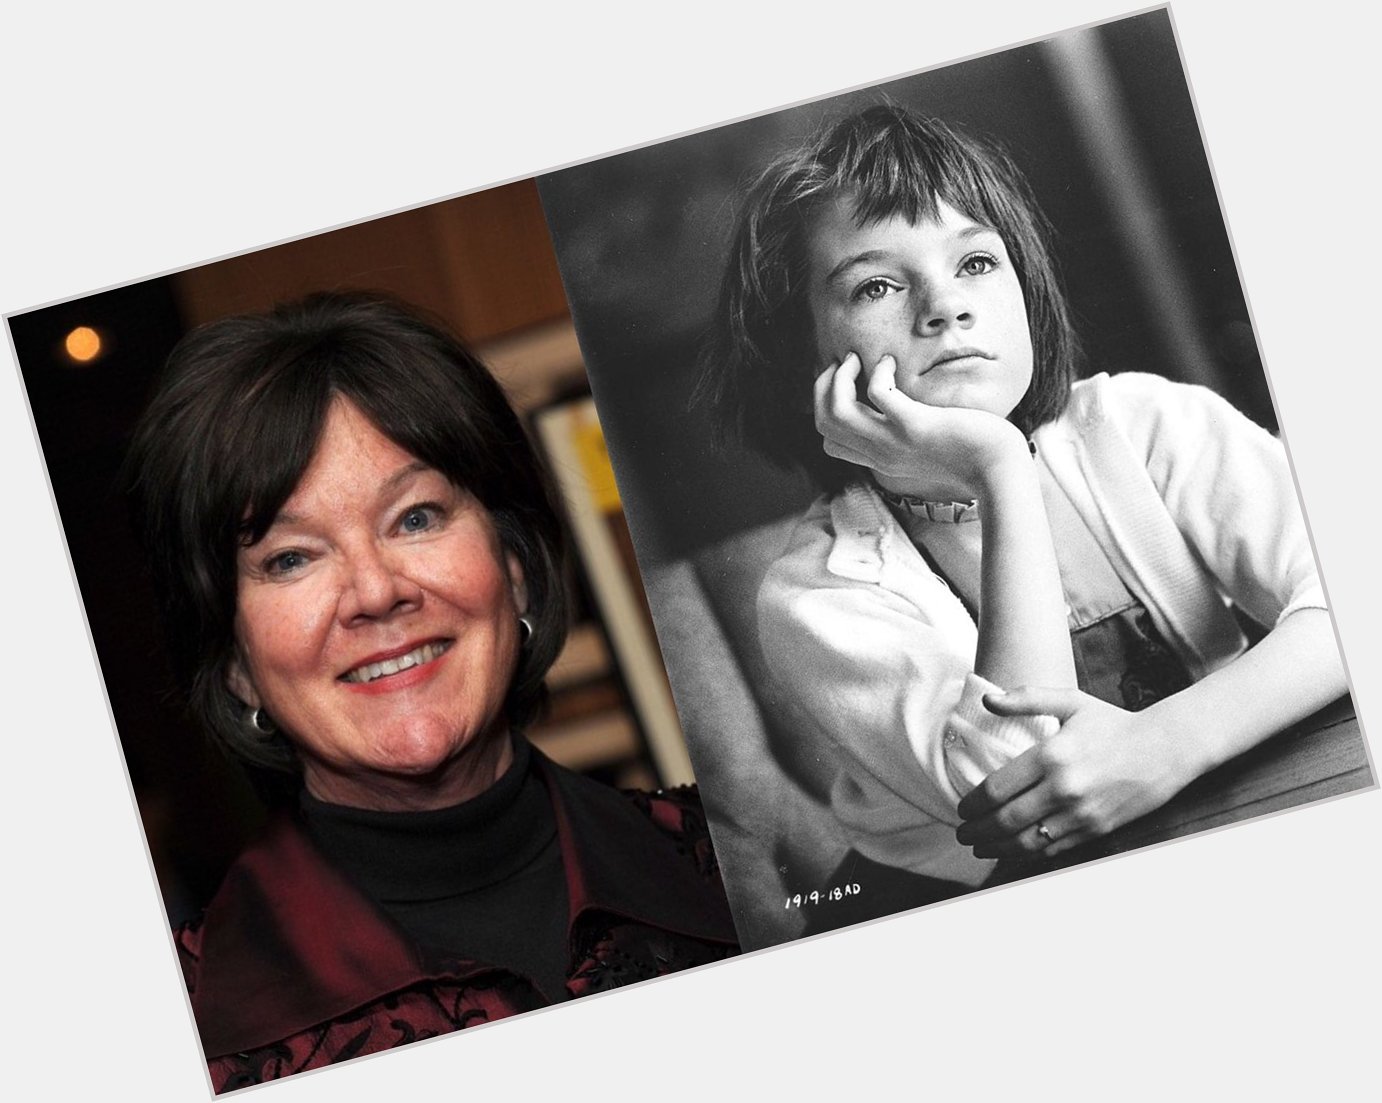 Happy 68th Birthday to Mary Badham! The actress who played Scout in To Kill a Mockingbird. 